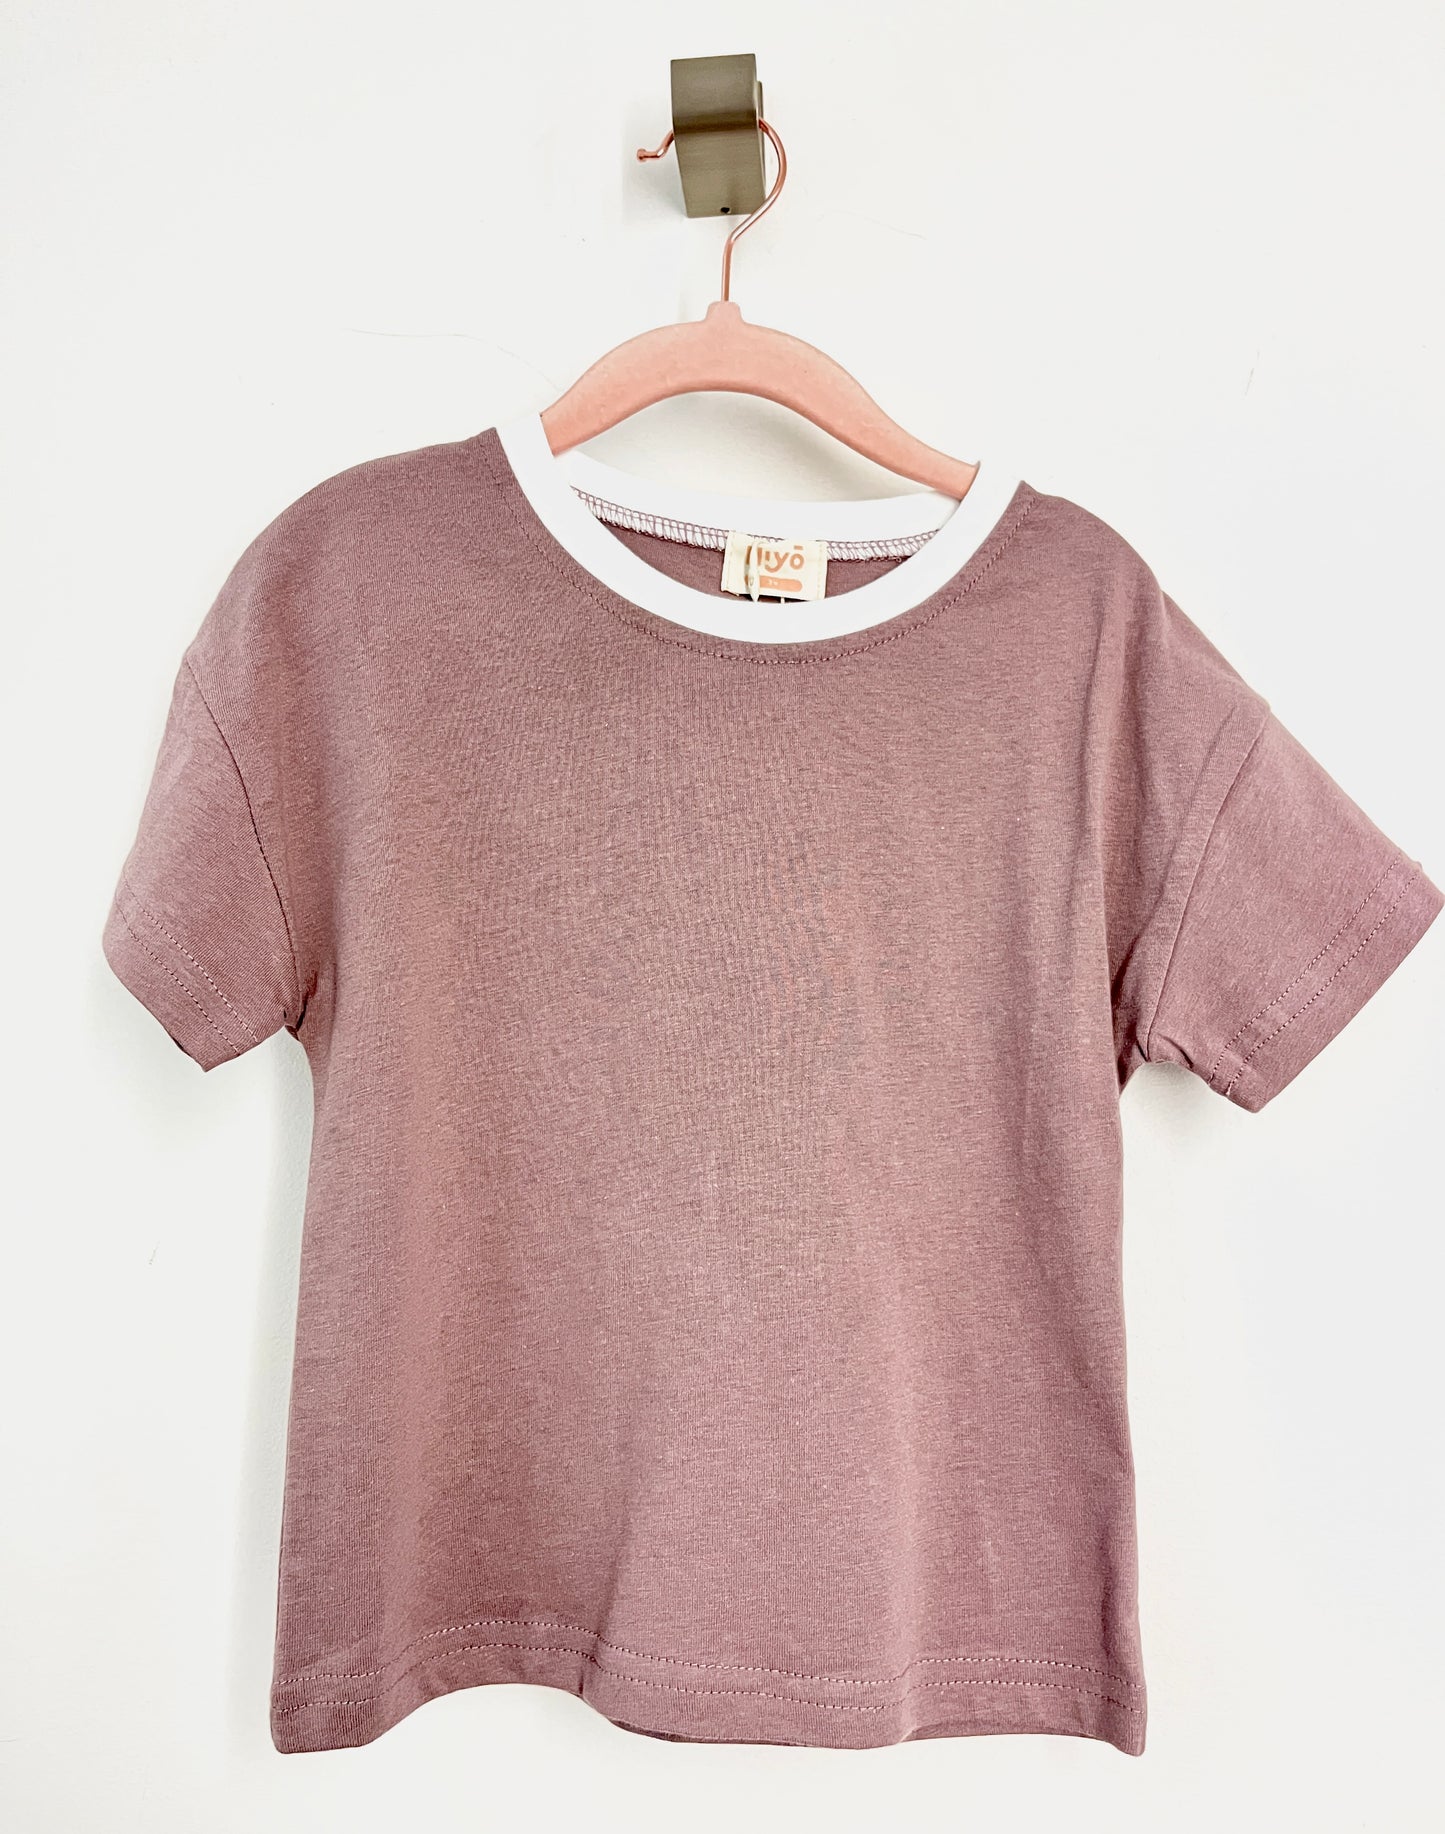 Two-Toned Tee in Lavender with White Trim